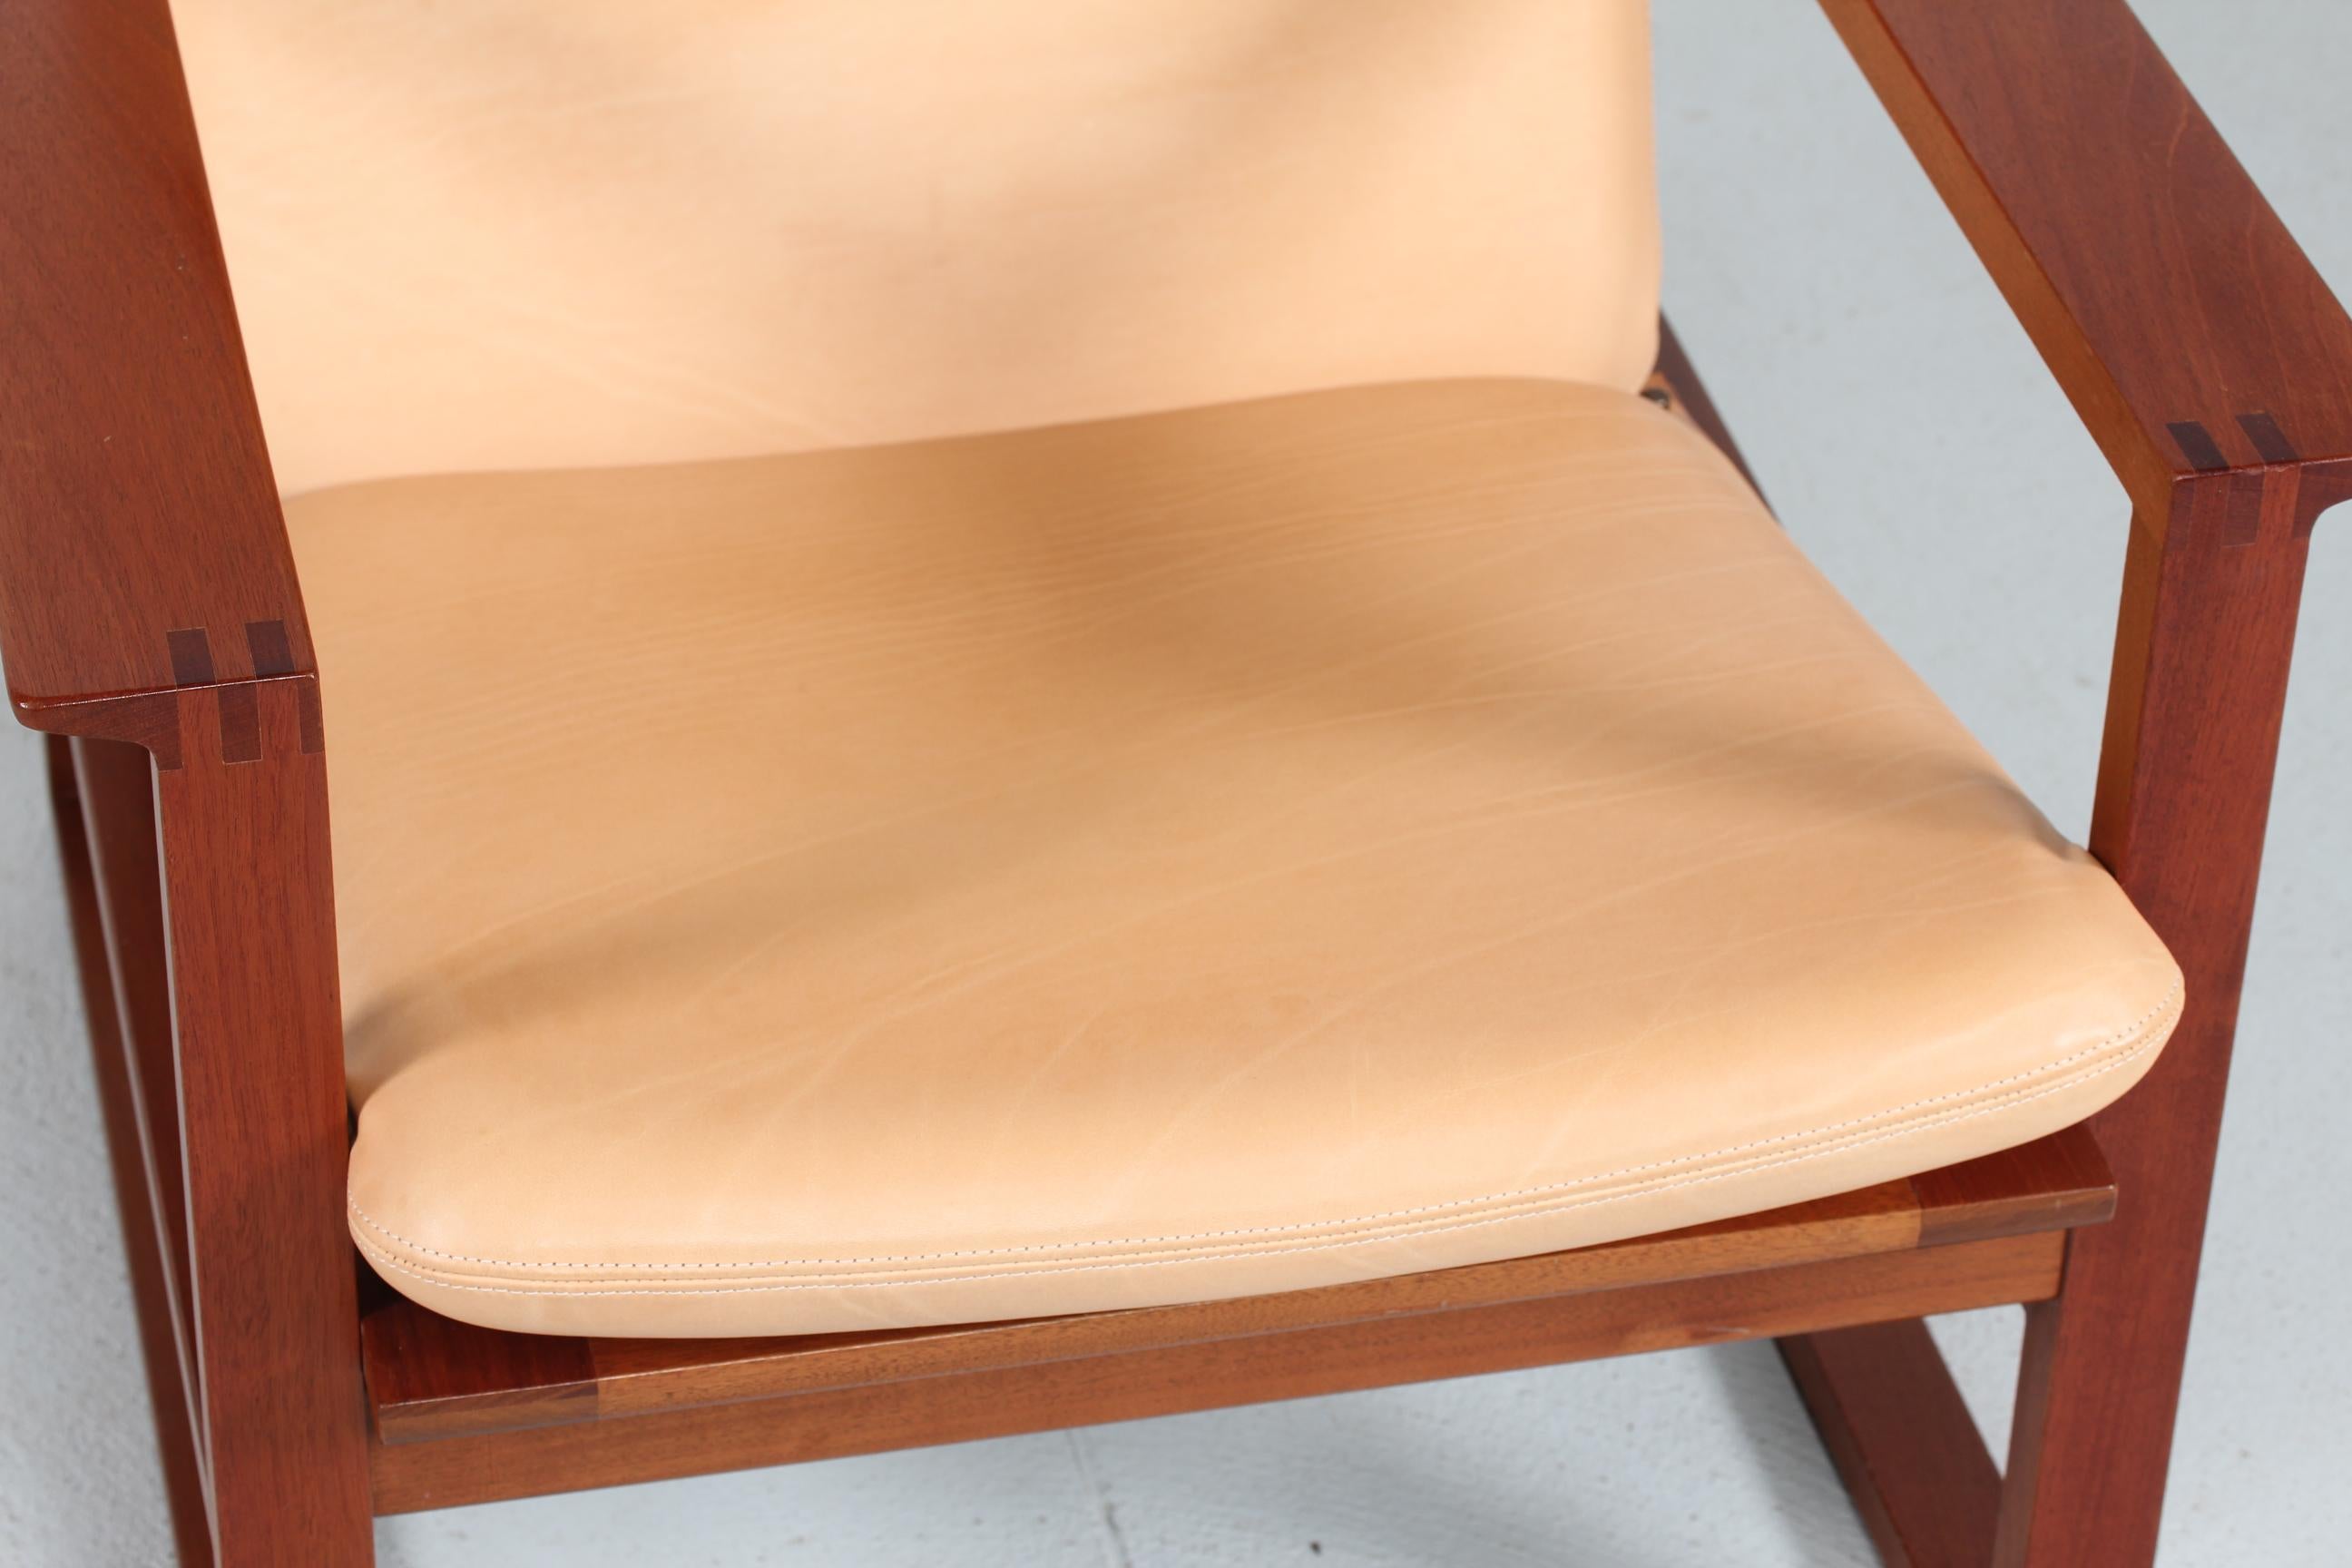 Mid-Century Modern Børge Mogensen Sled Chair 2254 with Aniline Leather by Fredericia Stolefabrik